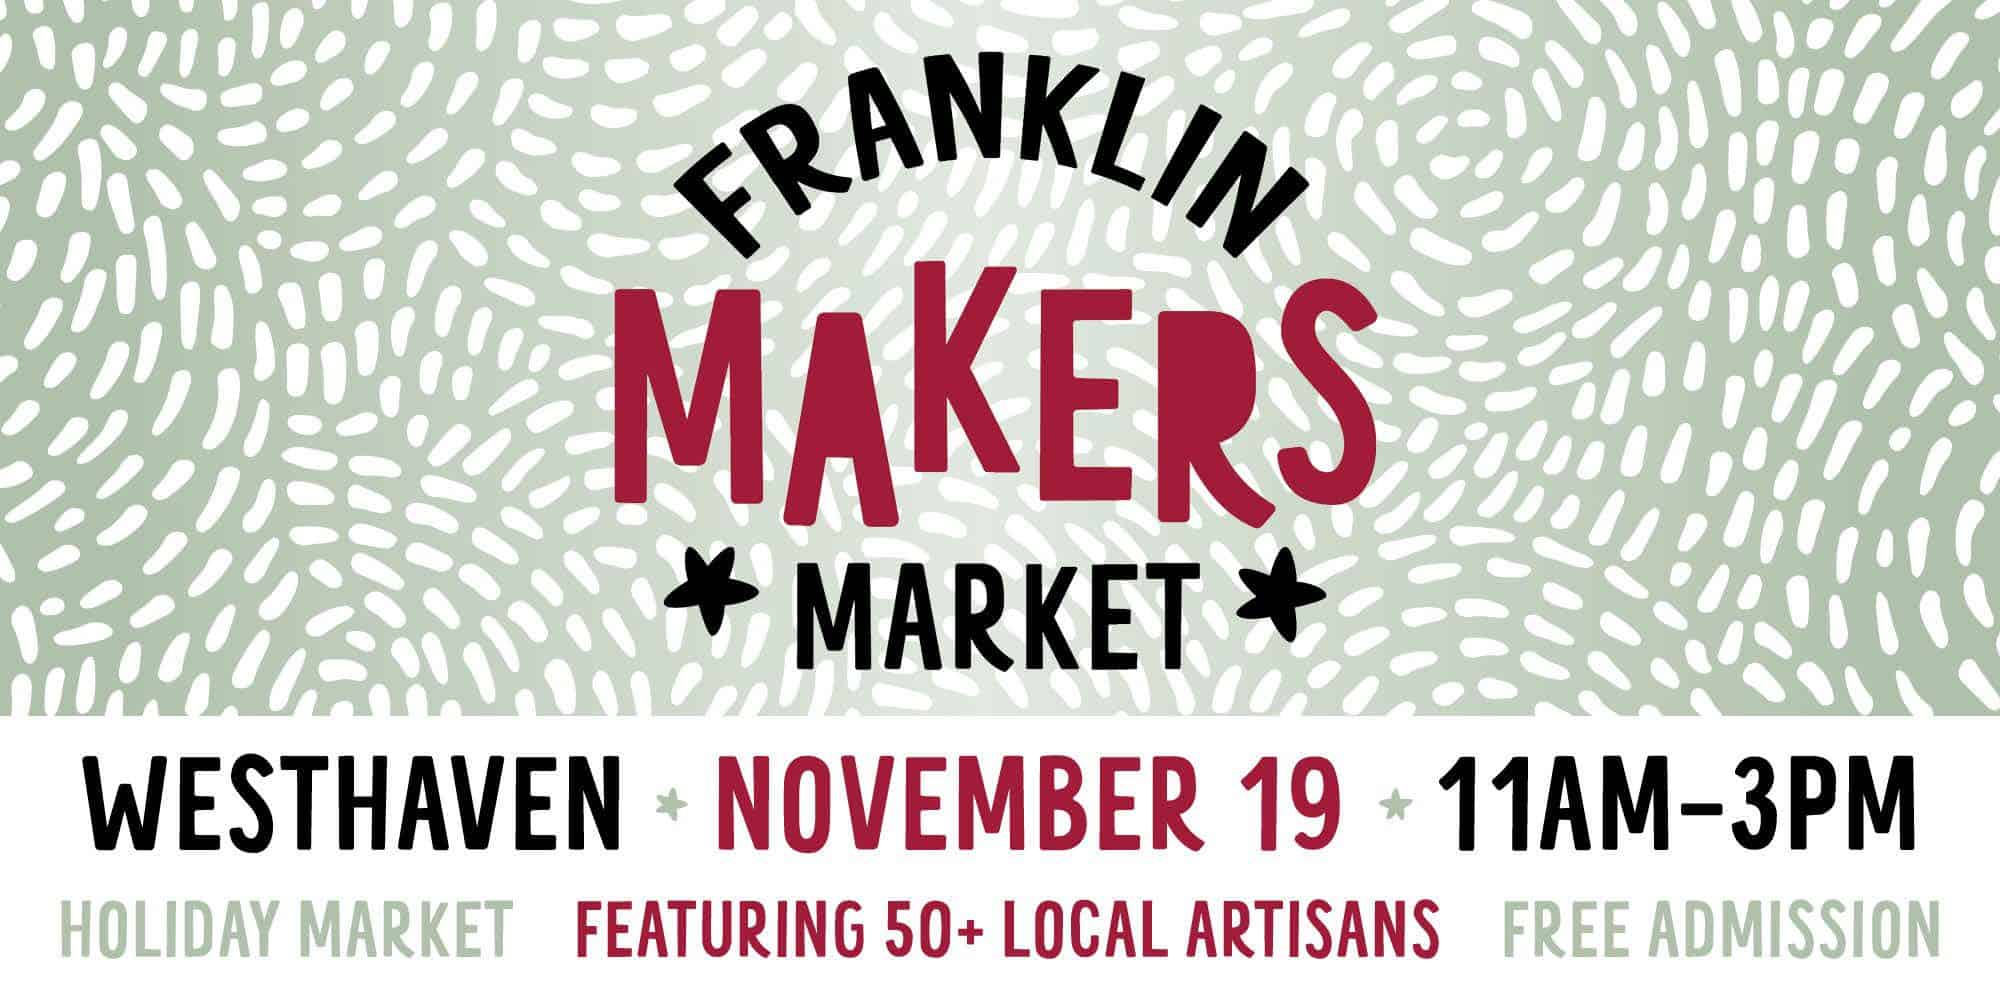 Franklin Makers Market - Holiday Market in Franklin, TN, browse goods from over 50 local craft vendors while ringing in the holiday season - you’ll even have the opportunity to snag a photo of Santa himself!